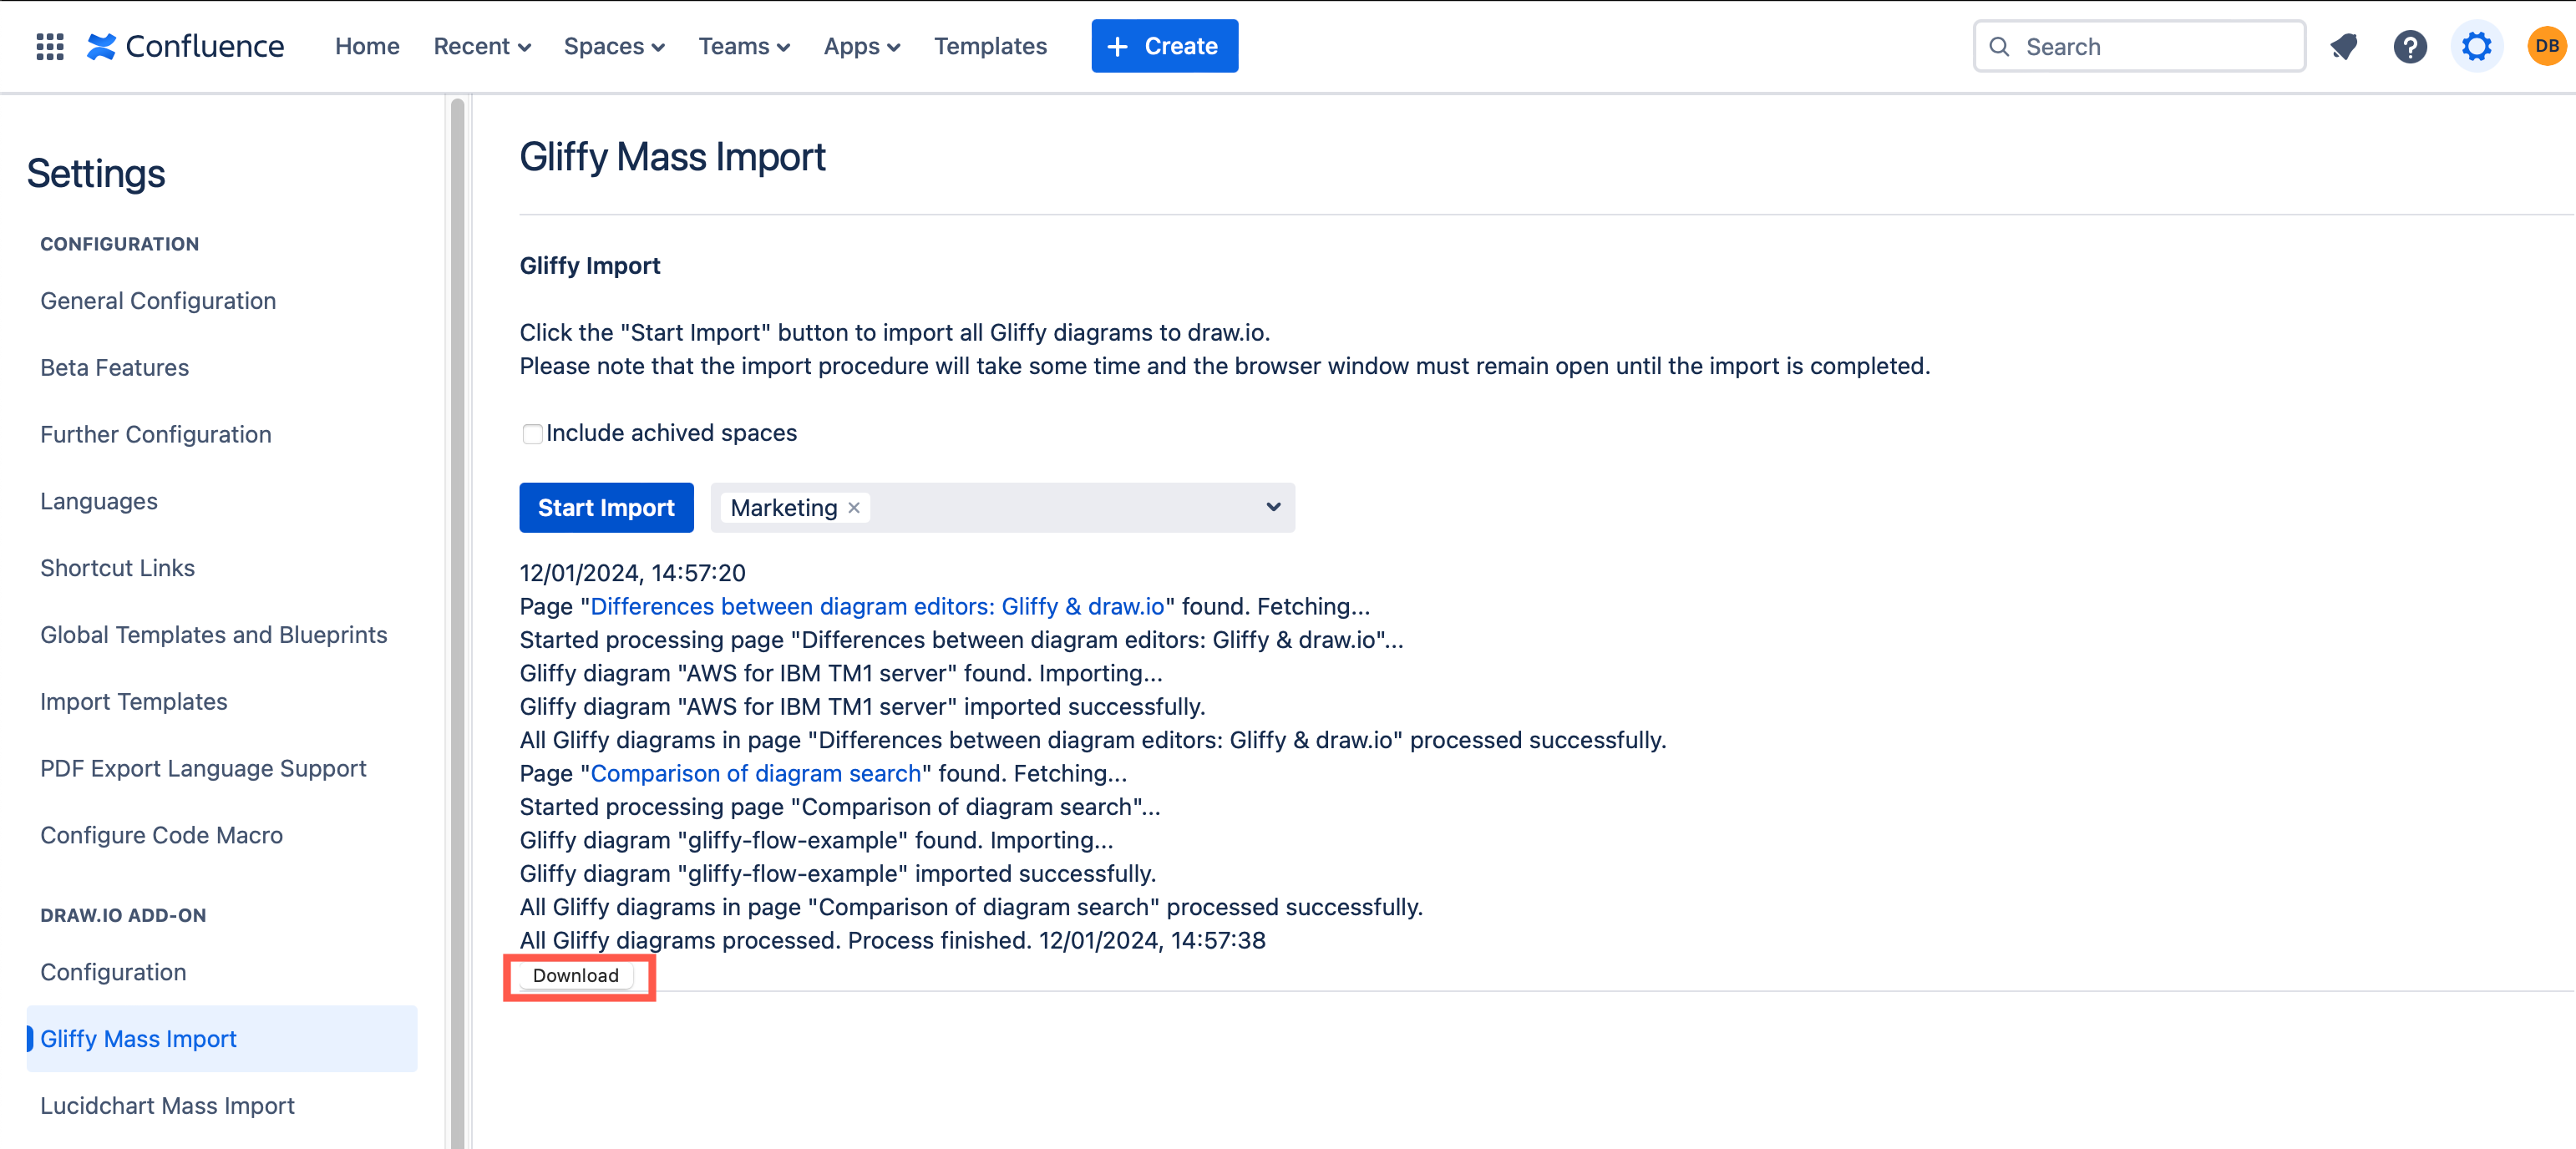 Log of the Gliffy mass import to draw.io in Confluence Cloud